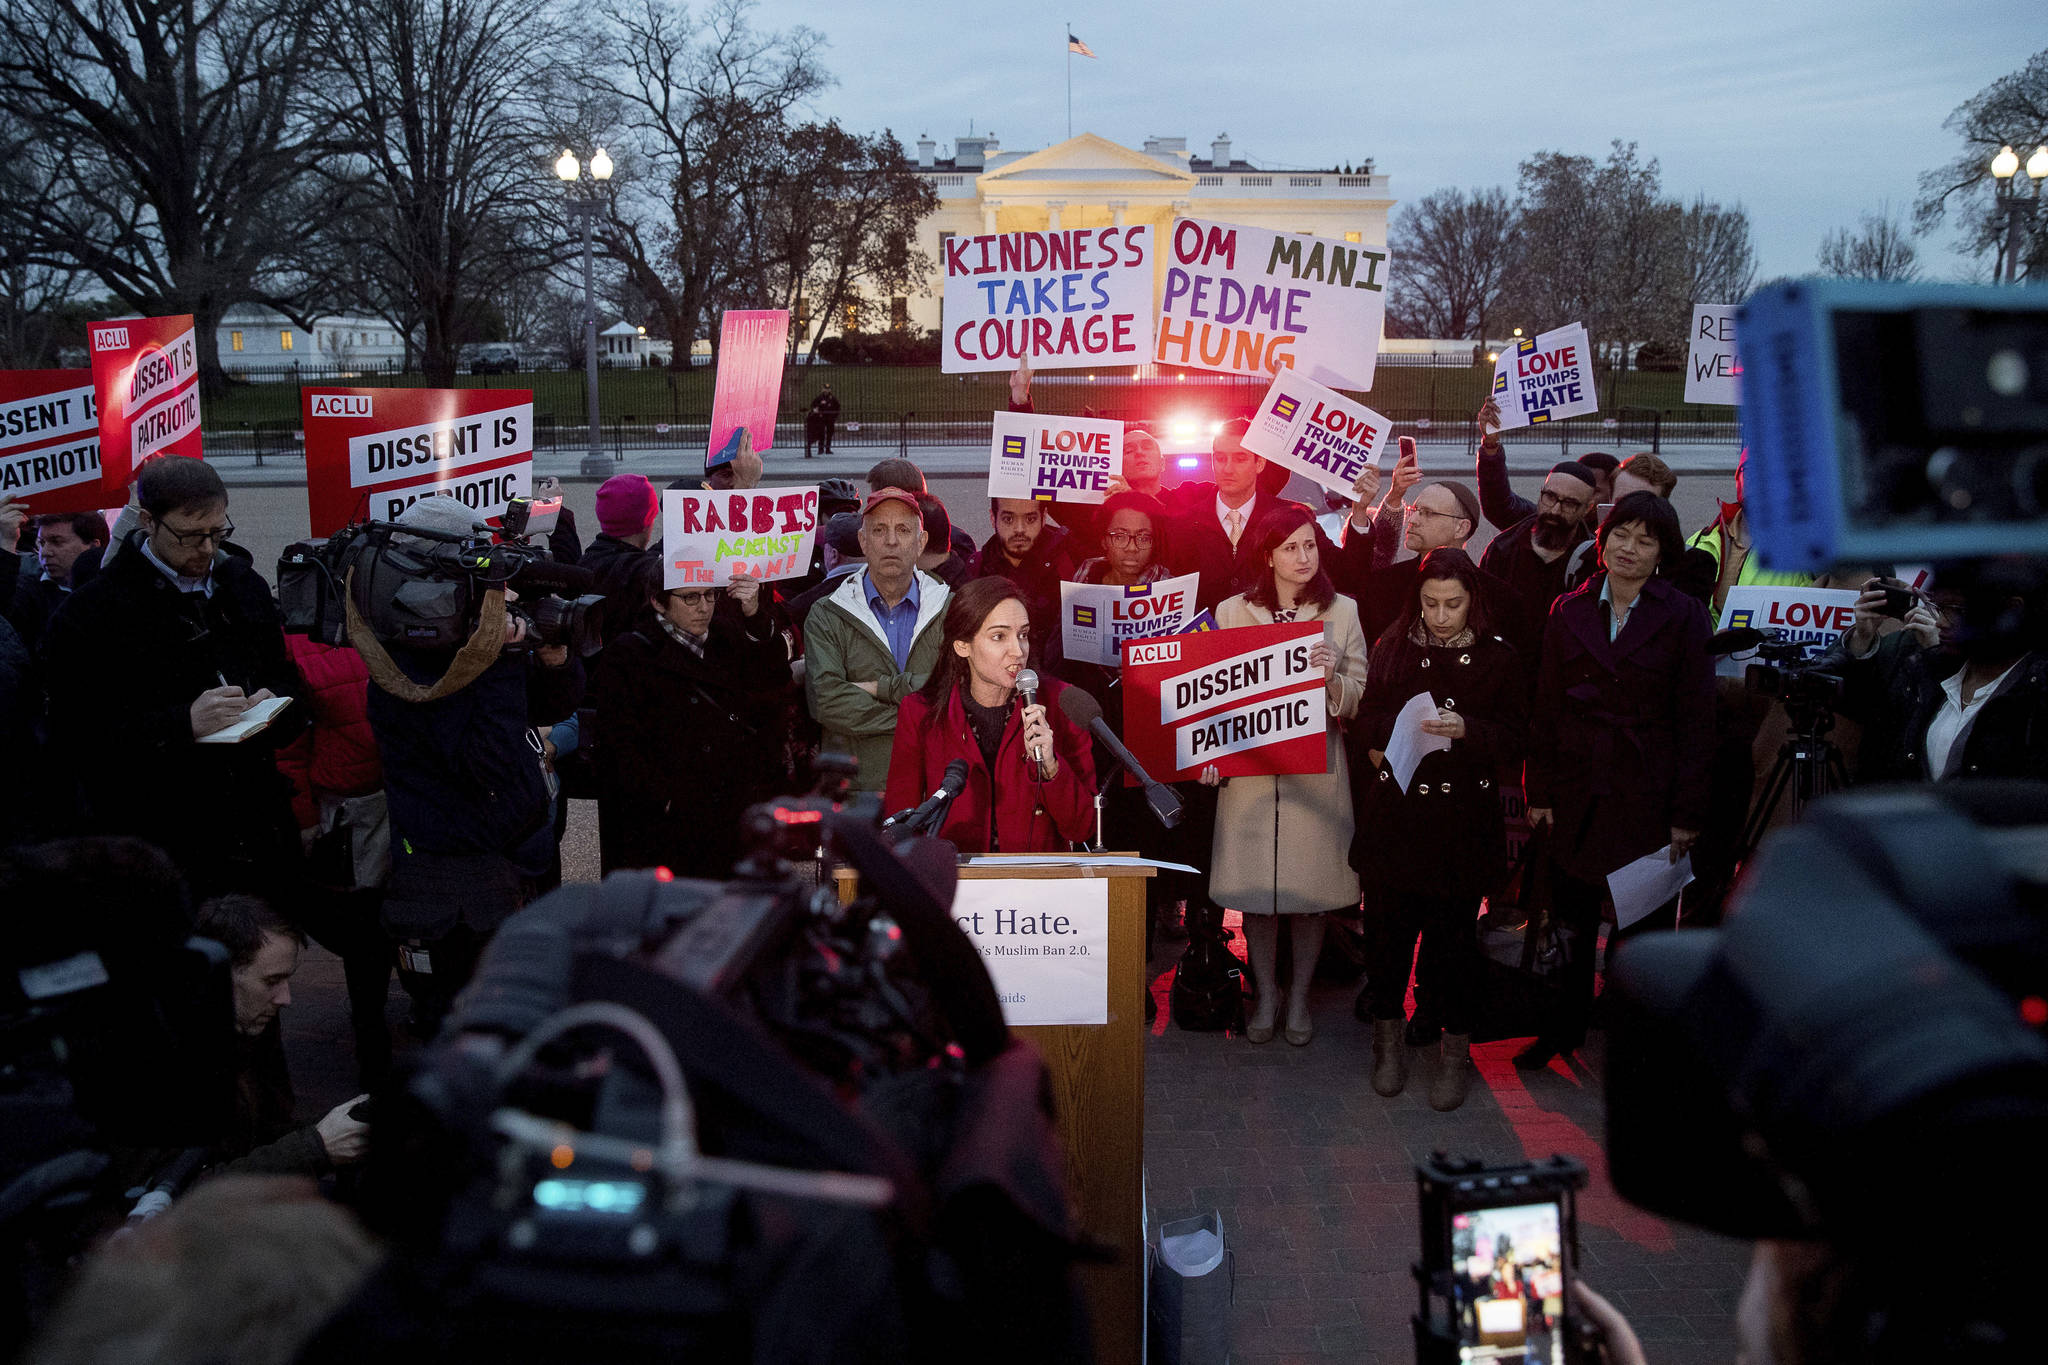 People gather for a protest against President Donald Trump’s new travel ban order in Lafayette Park outside the White House on Monday in Washington, D.C. (Andrew Harnik/The Associated Press)